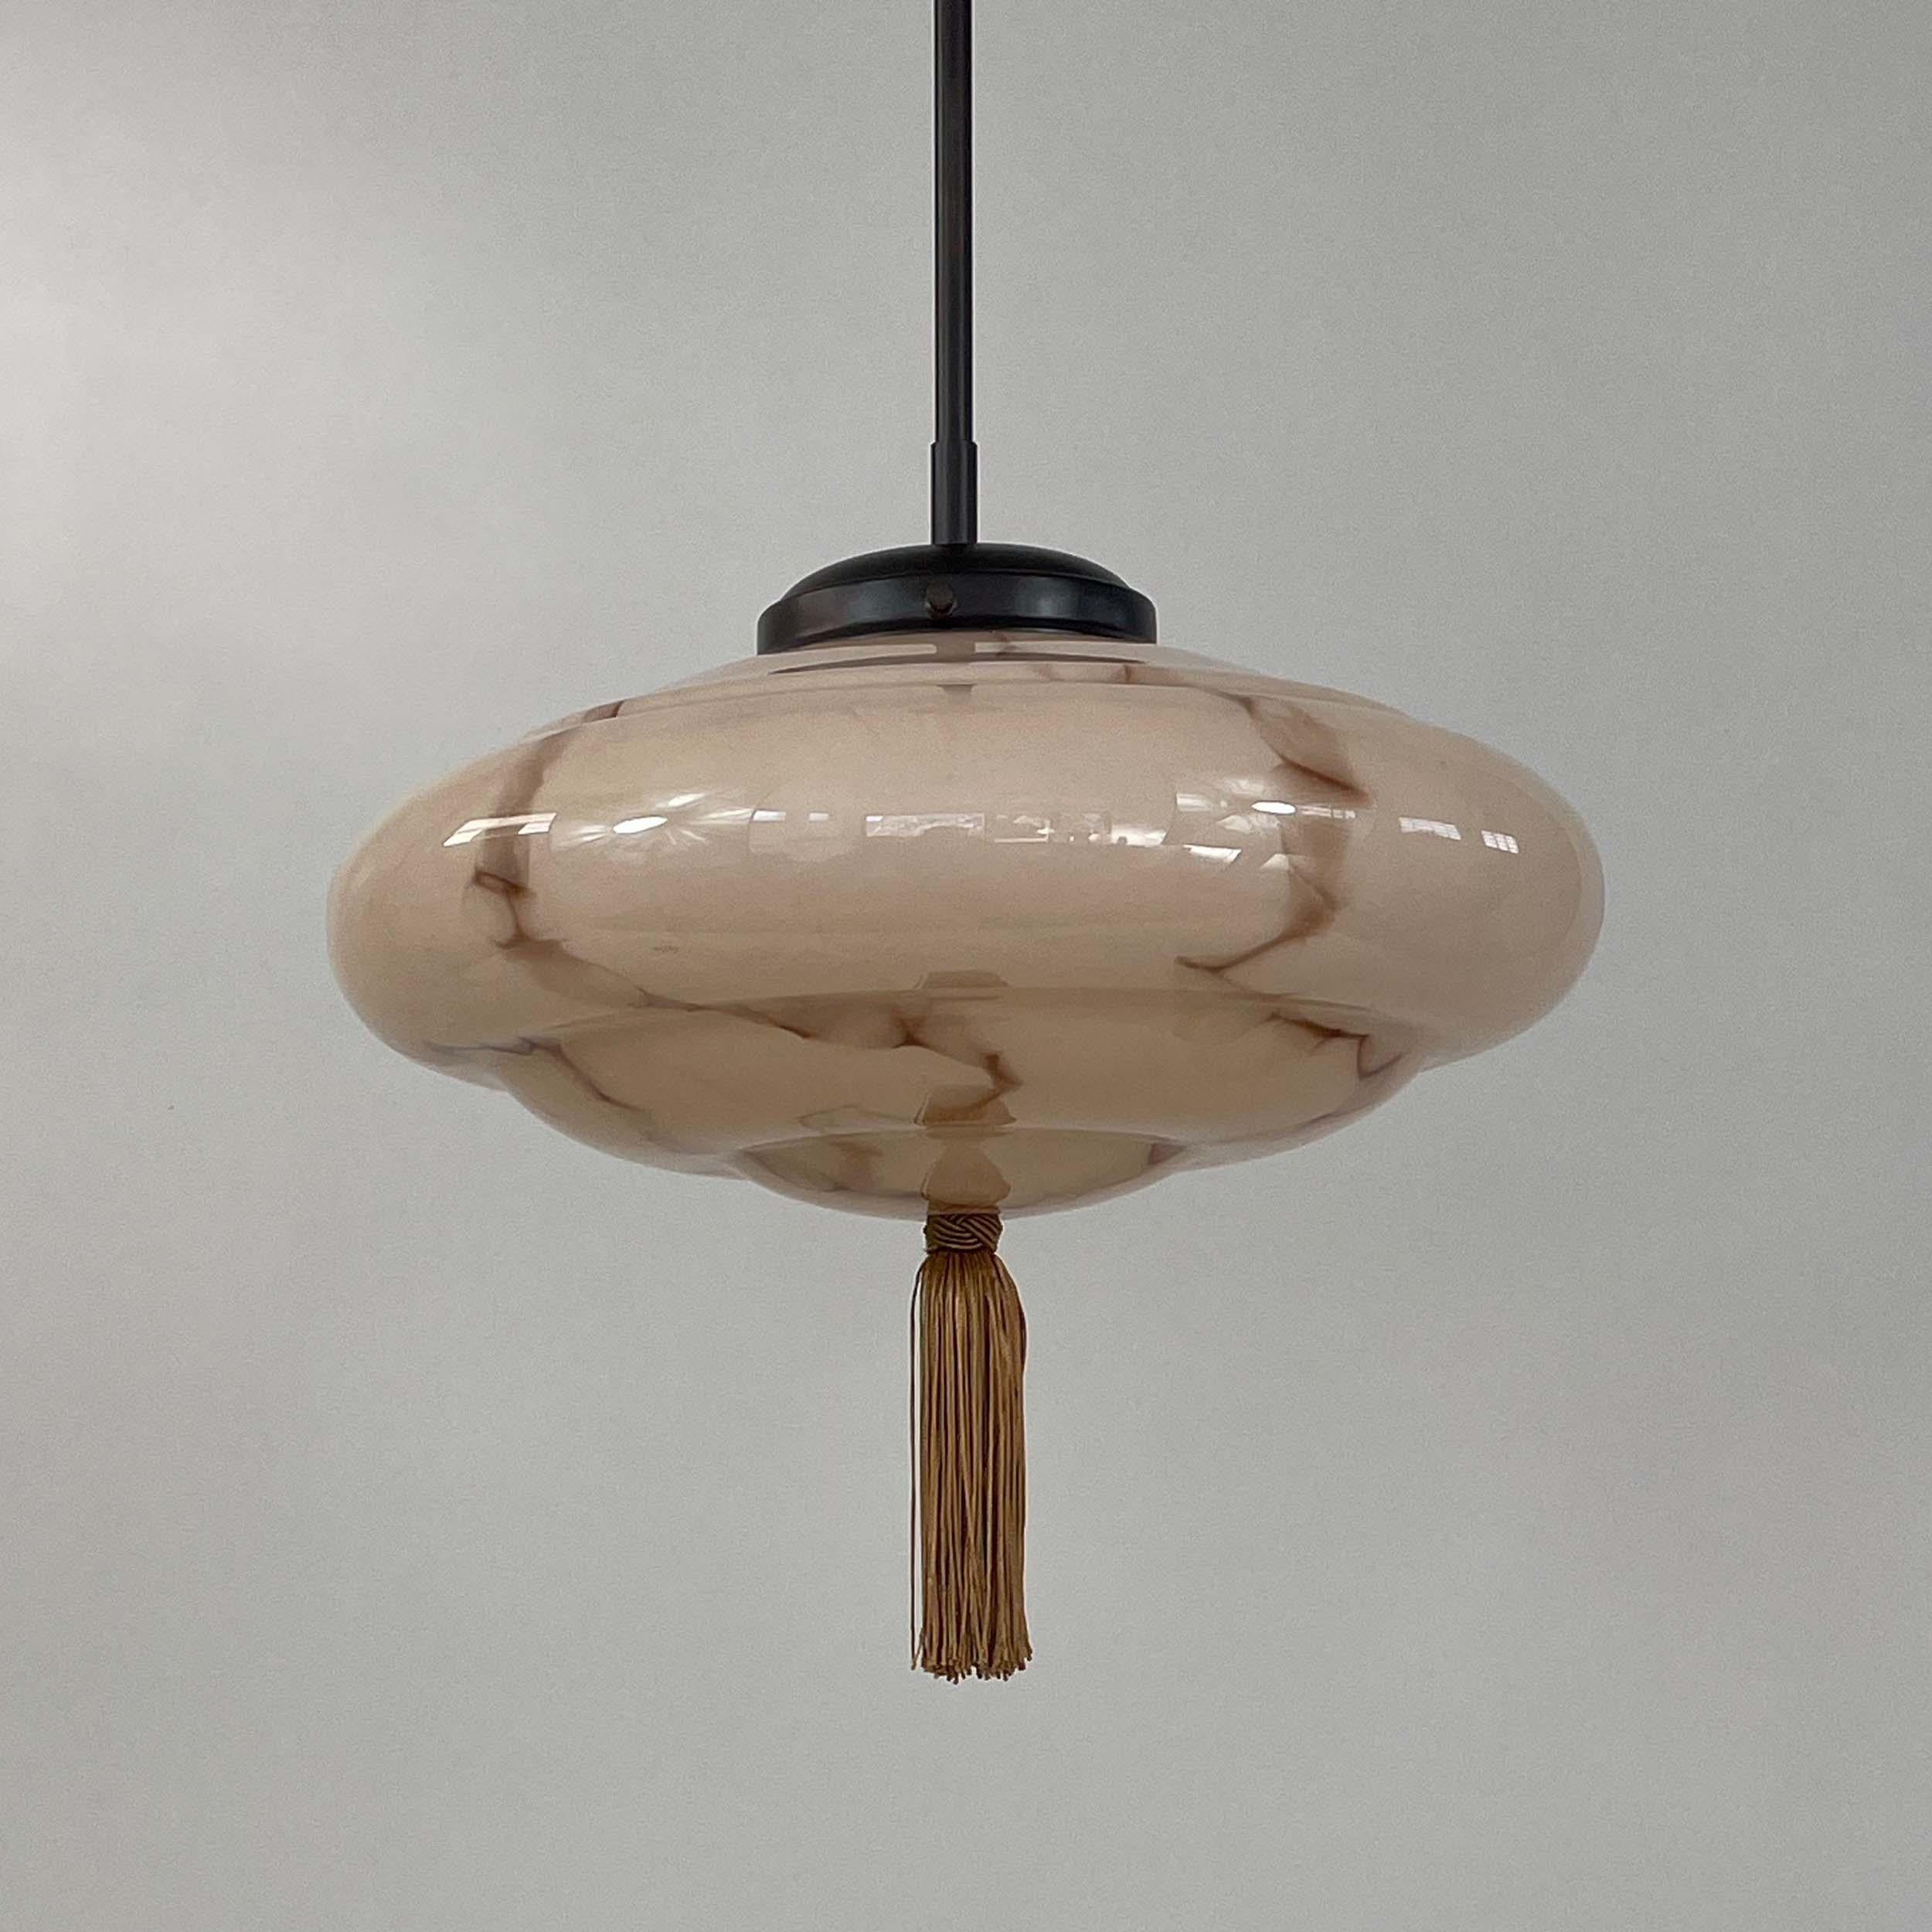 This unusual Art Deco fixture was designed and manufactured in Germany in the 1920s to 1930s during the Bauhaus period. It features a cream colored marbled glass lampshade, a bronze silk tassel and bronzed brass hardware. The glass shade with a